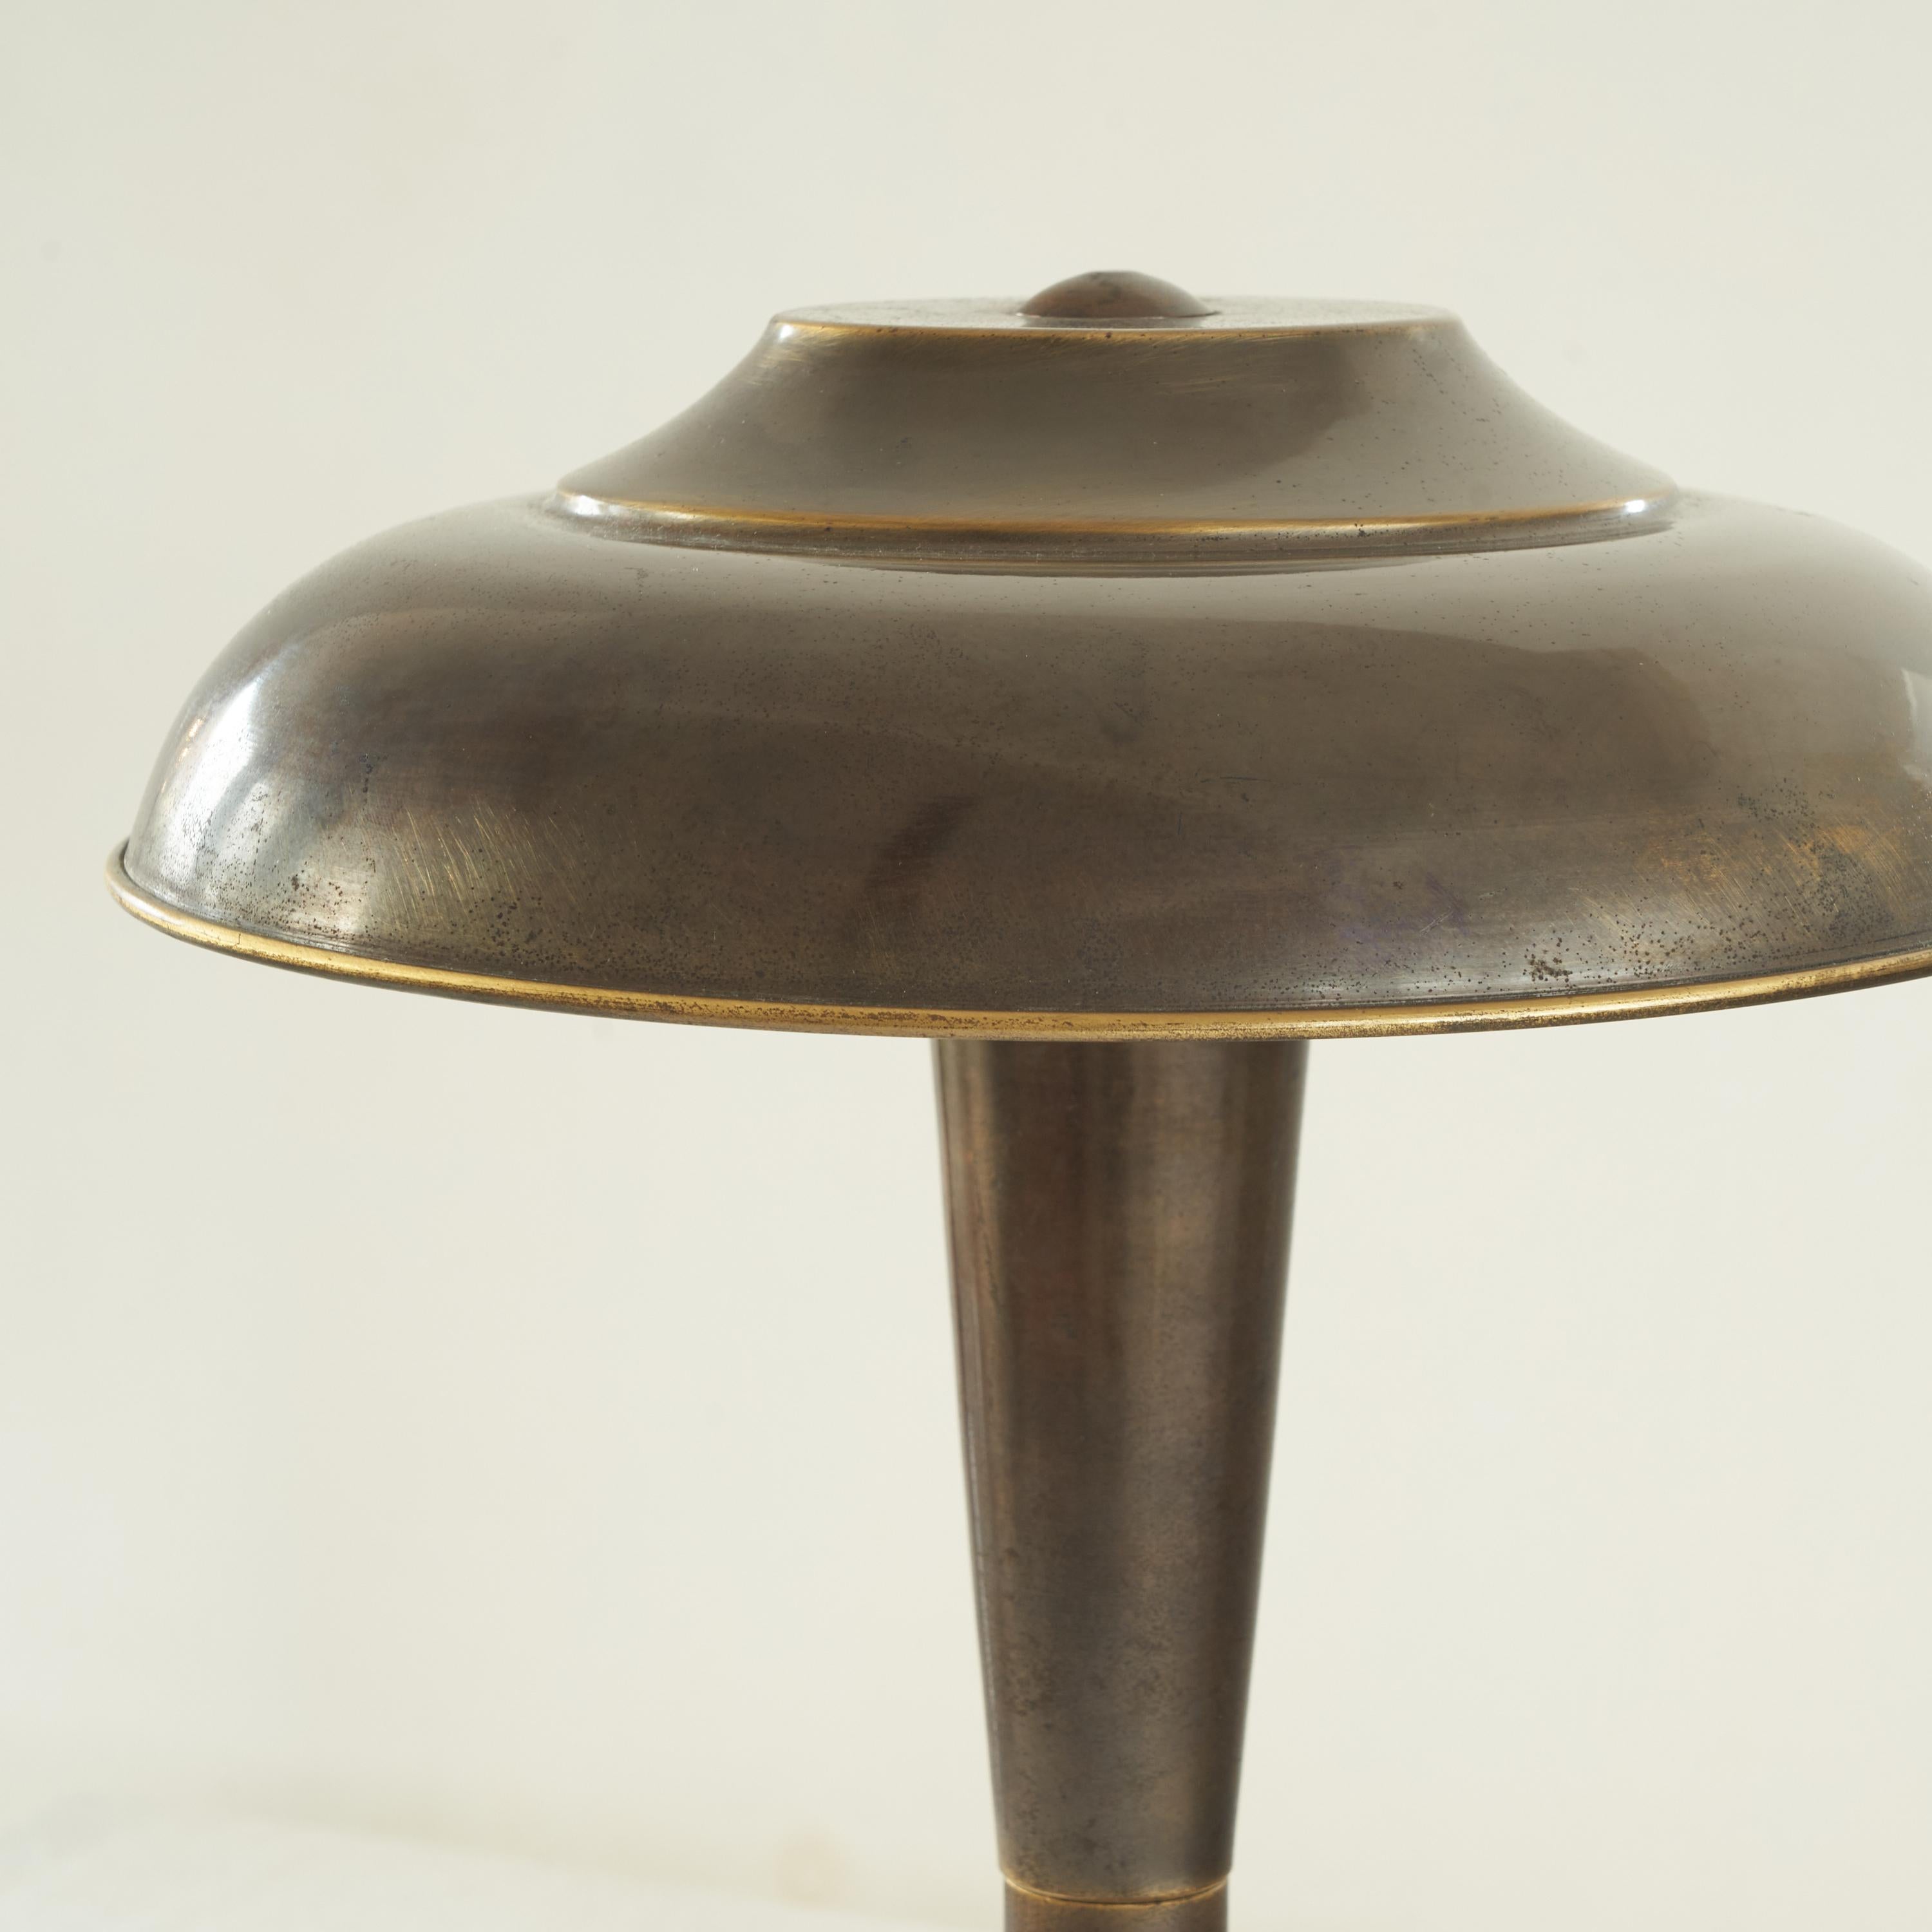 Art Deco Table Lamp in Patinated Brass 1950s For Sale 6